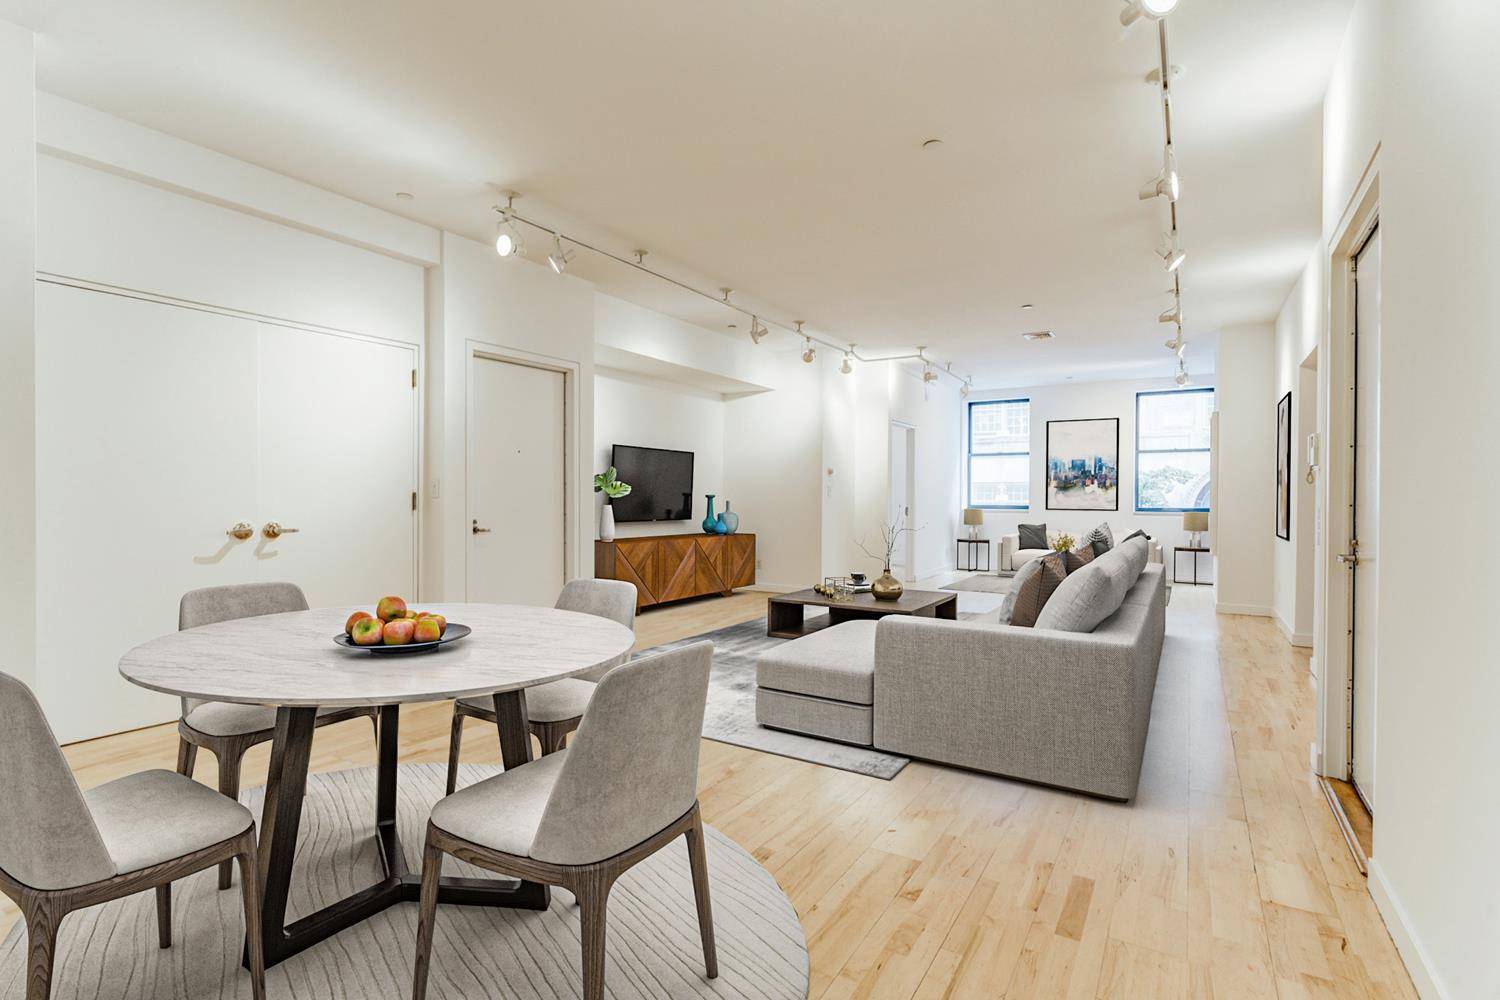 Live in one of the city s most sought after neighborhoods the historic Lower East Side.